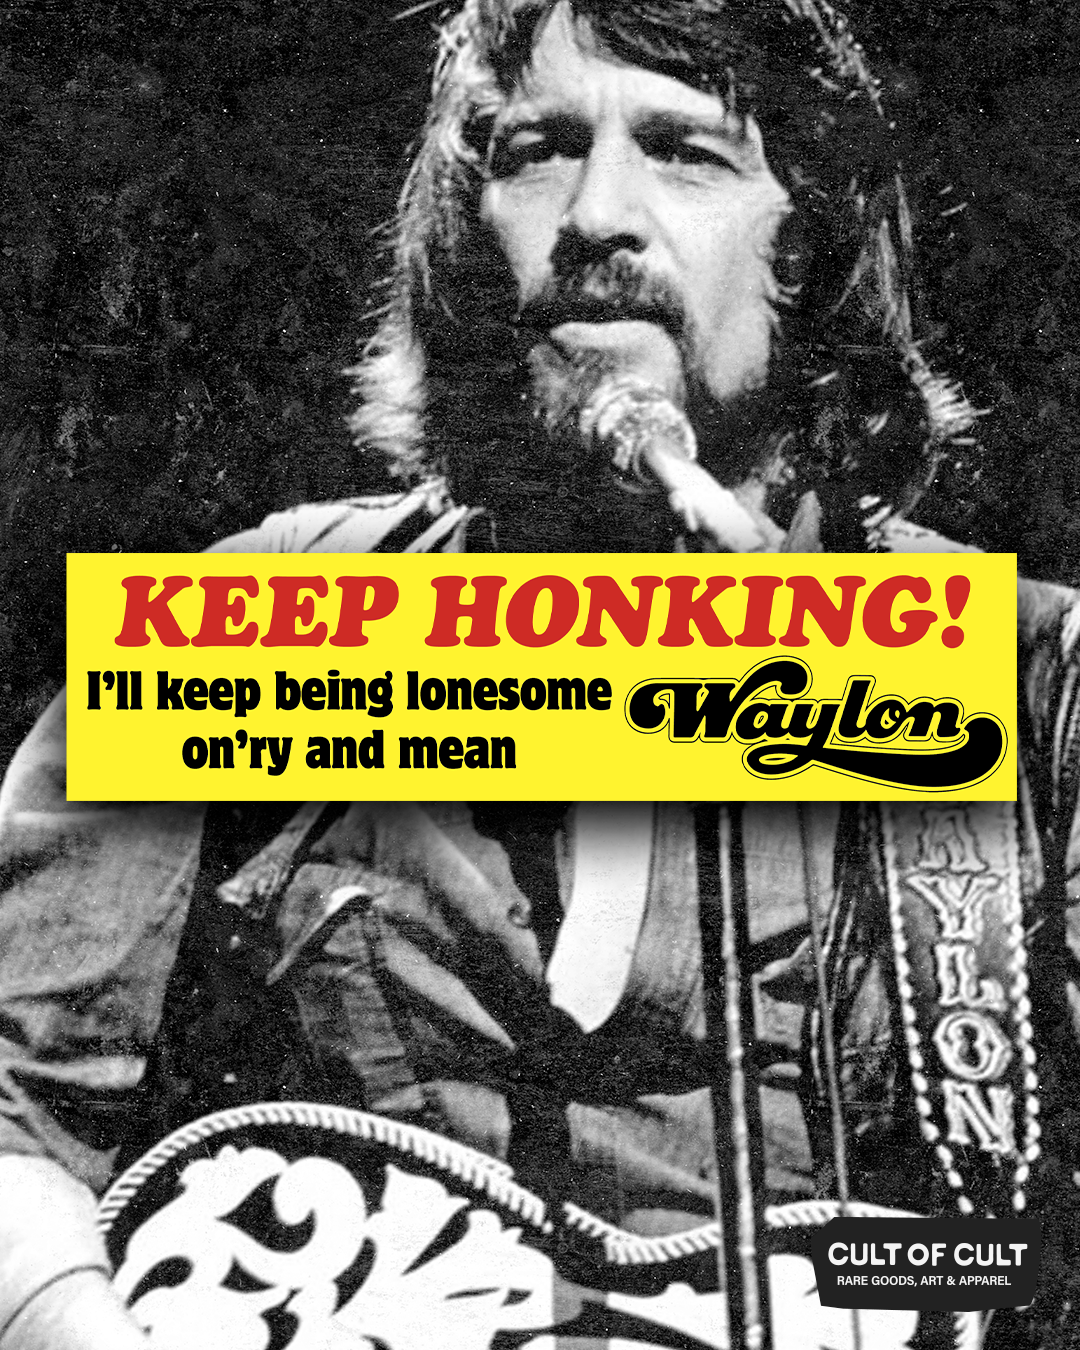 An individual picture of the Keep Honking Waylon Jennings bumper sticker